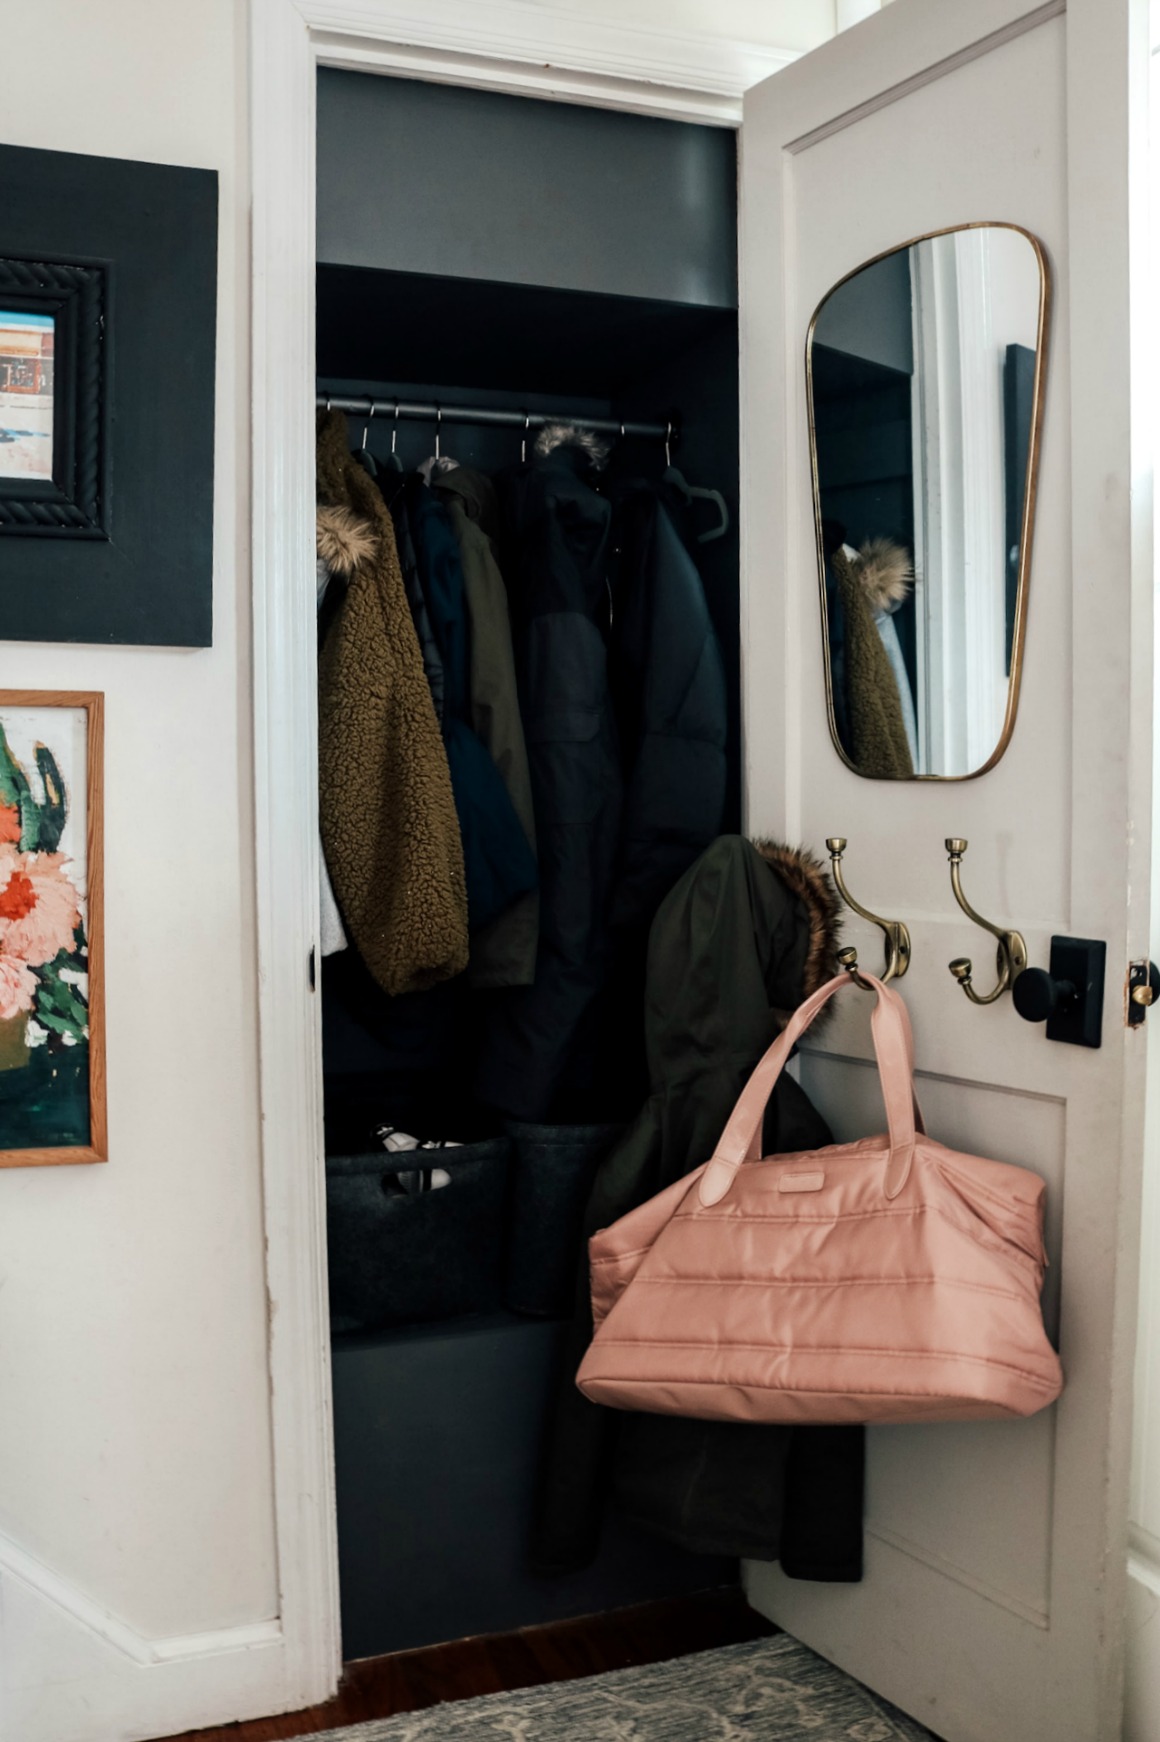 Entry and that Entry Closet, PLUS 10 Things I Bought at Walmart